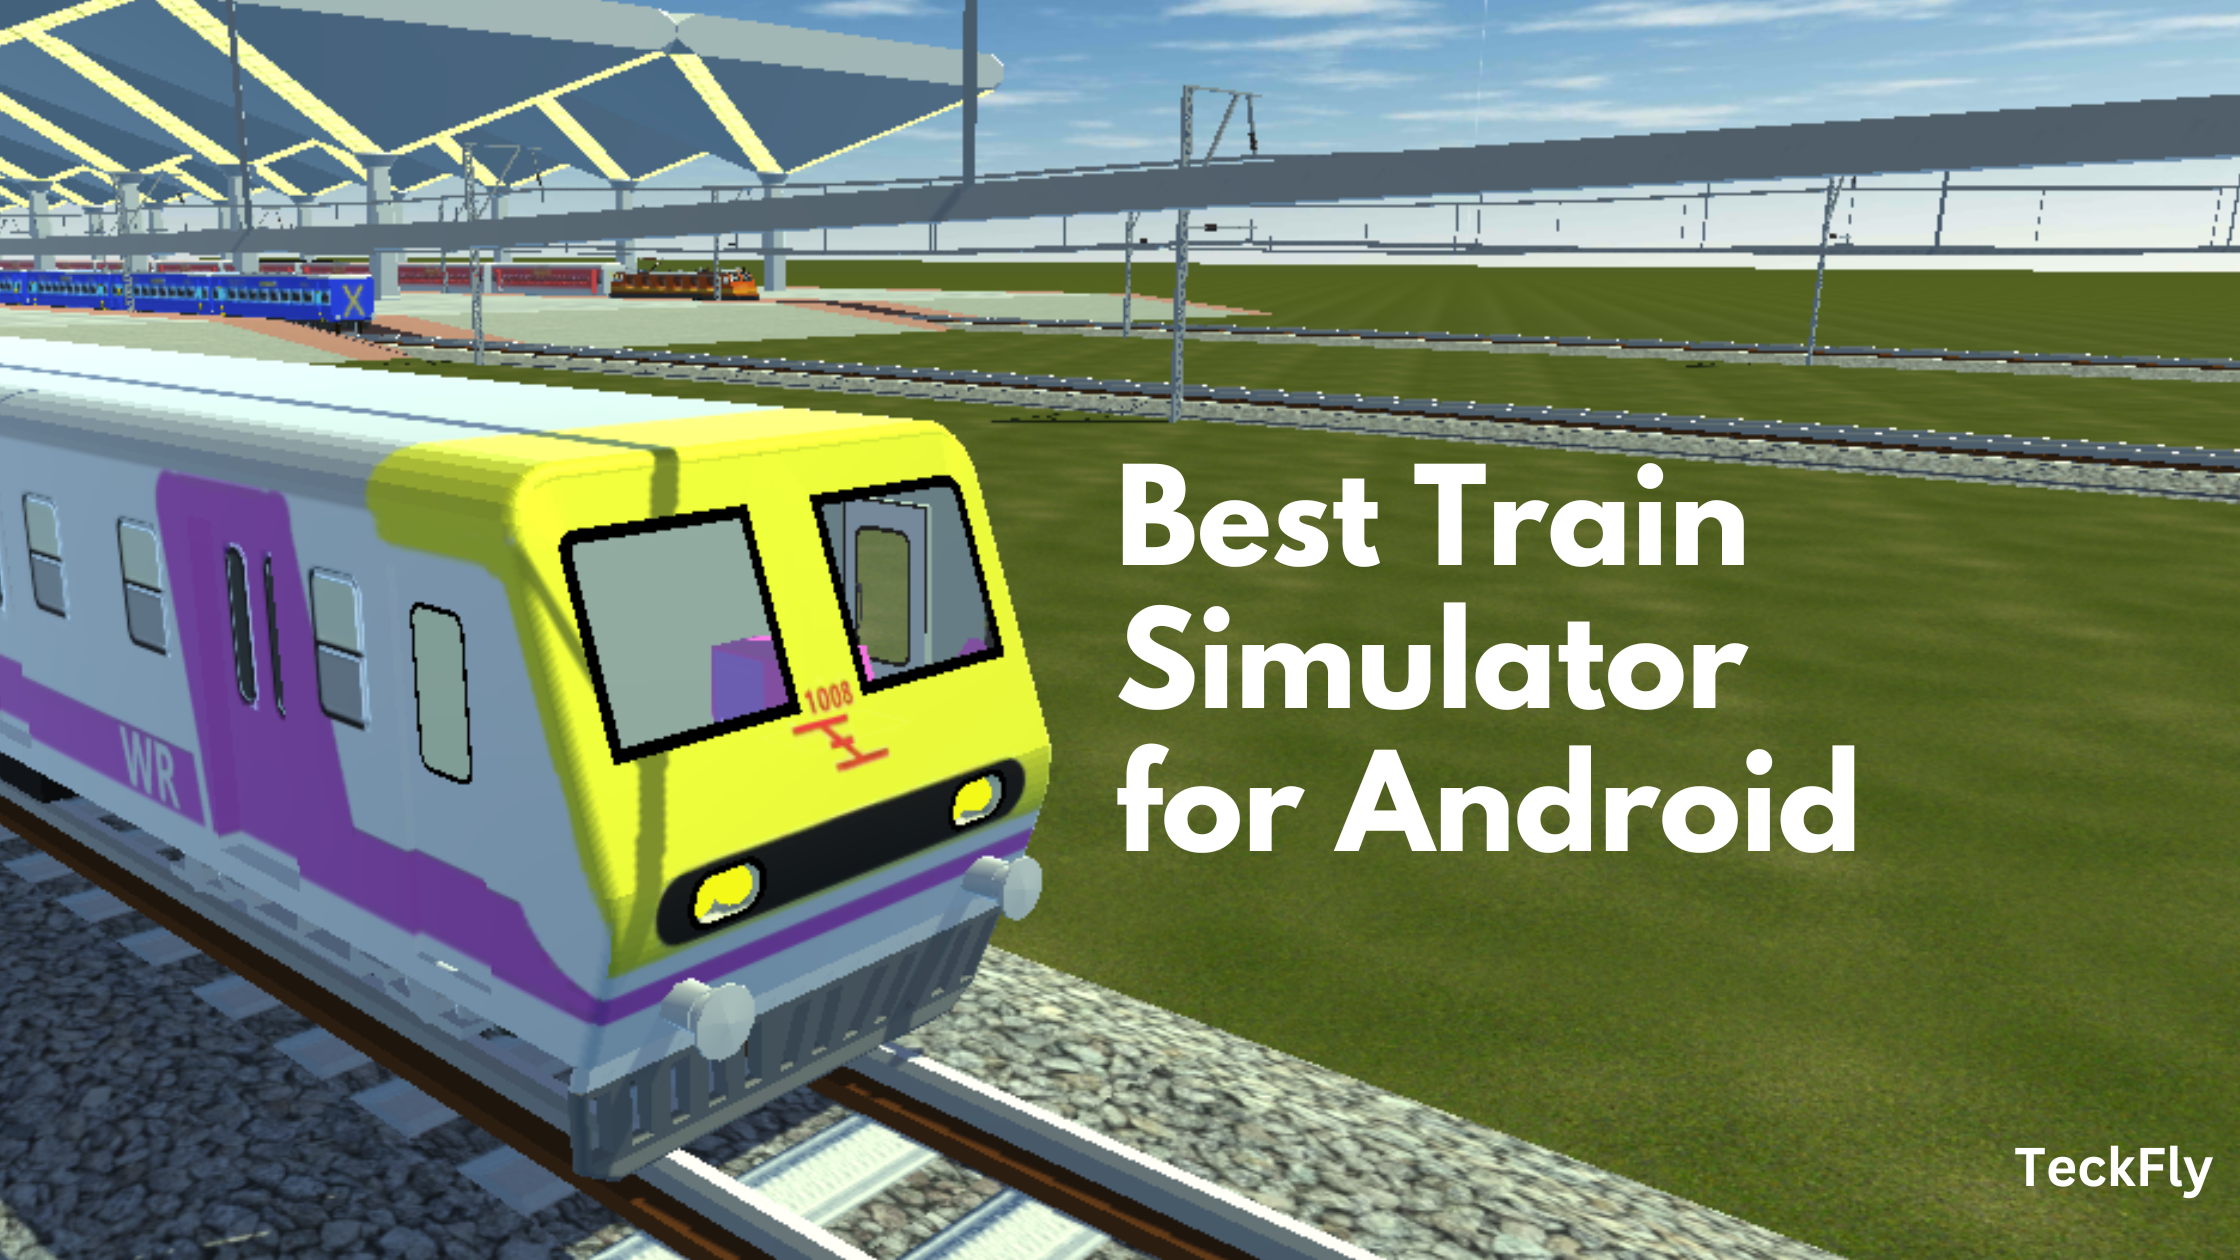 Best Train Simulator for Android